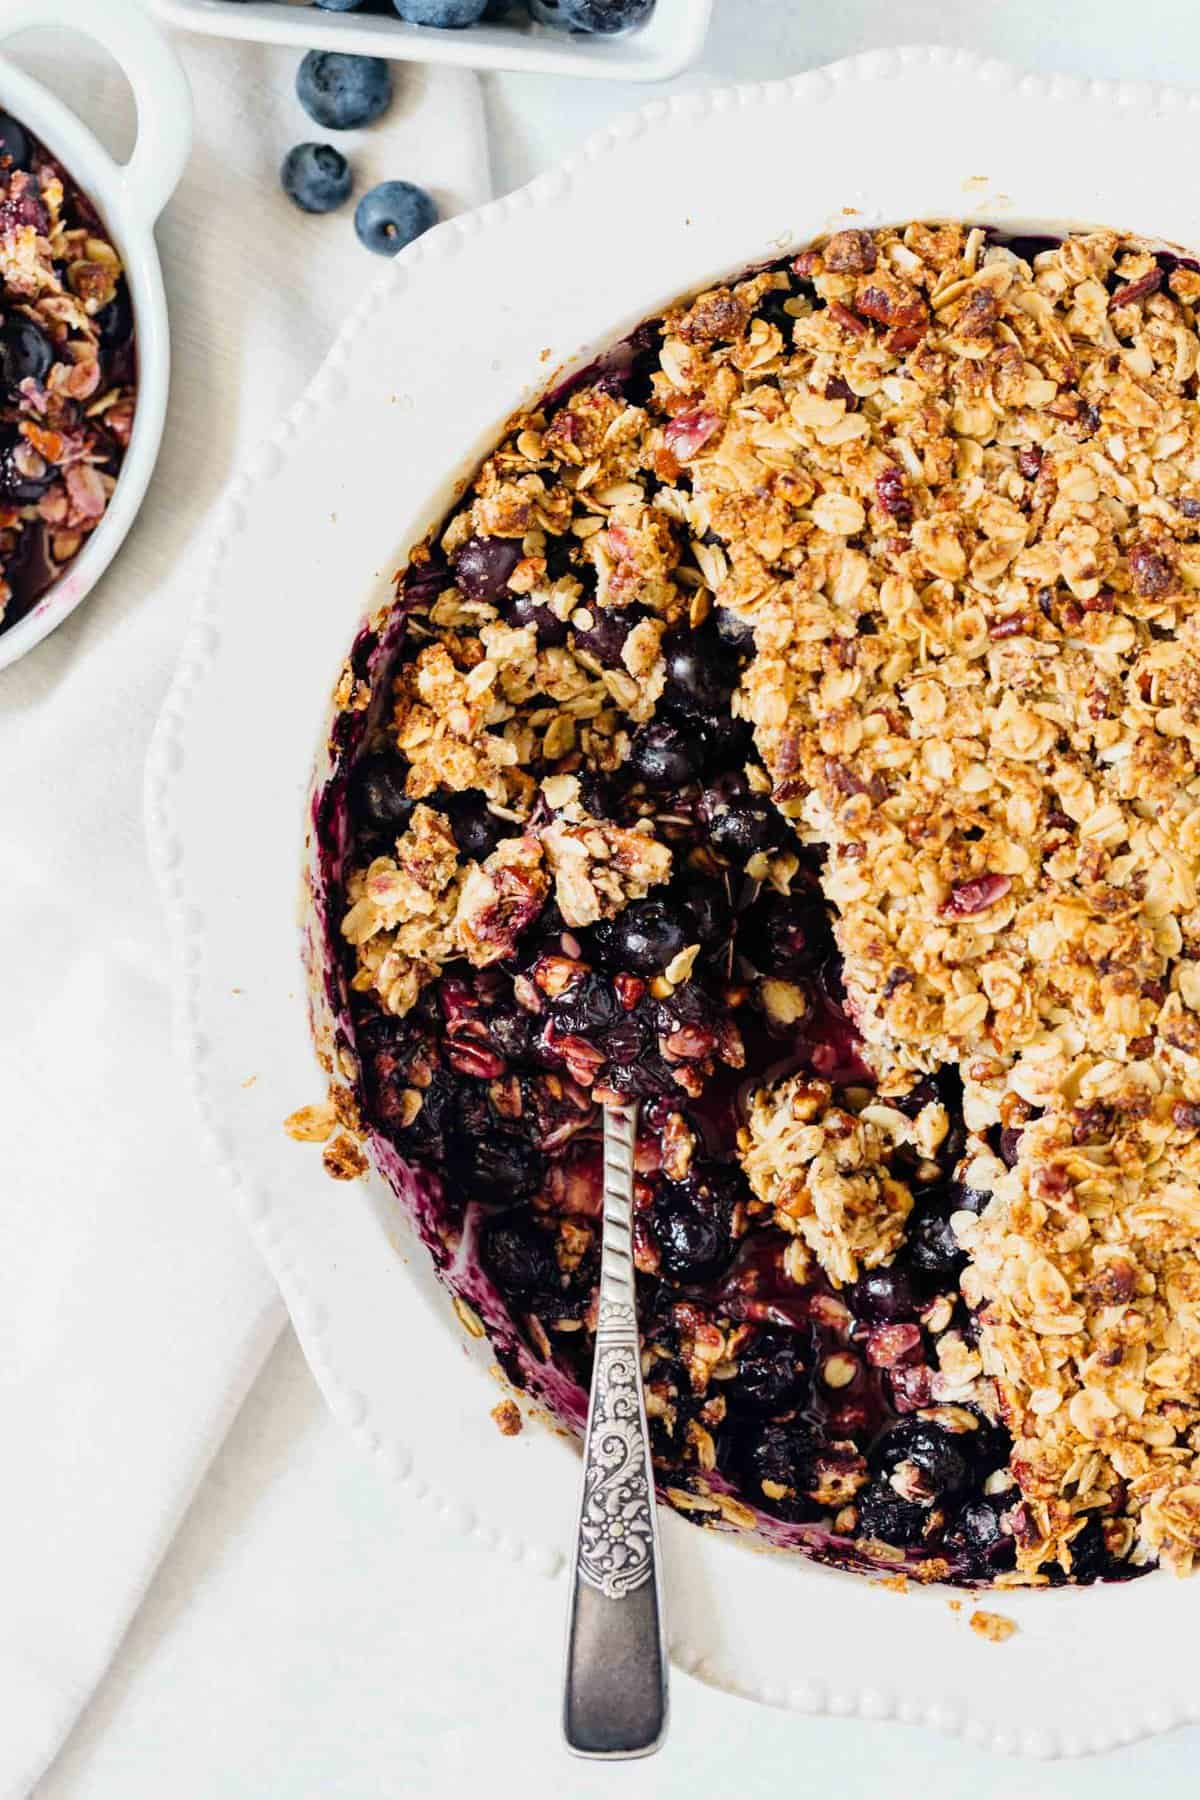 This blueberry pecan crumble is effortless to put together but it is an exceptional dessert to have to finish off any dinner party or get-together! #blueberrycrumble #blueberrypecan #blueberry #pecan #blueberrydessert #dessert #summerdessert